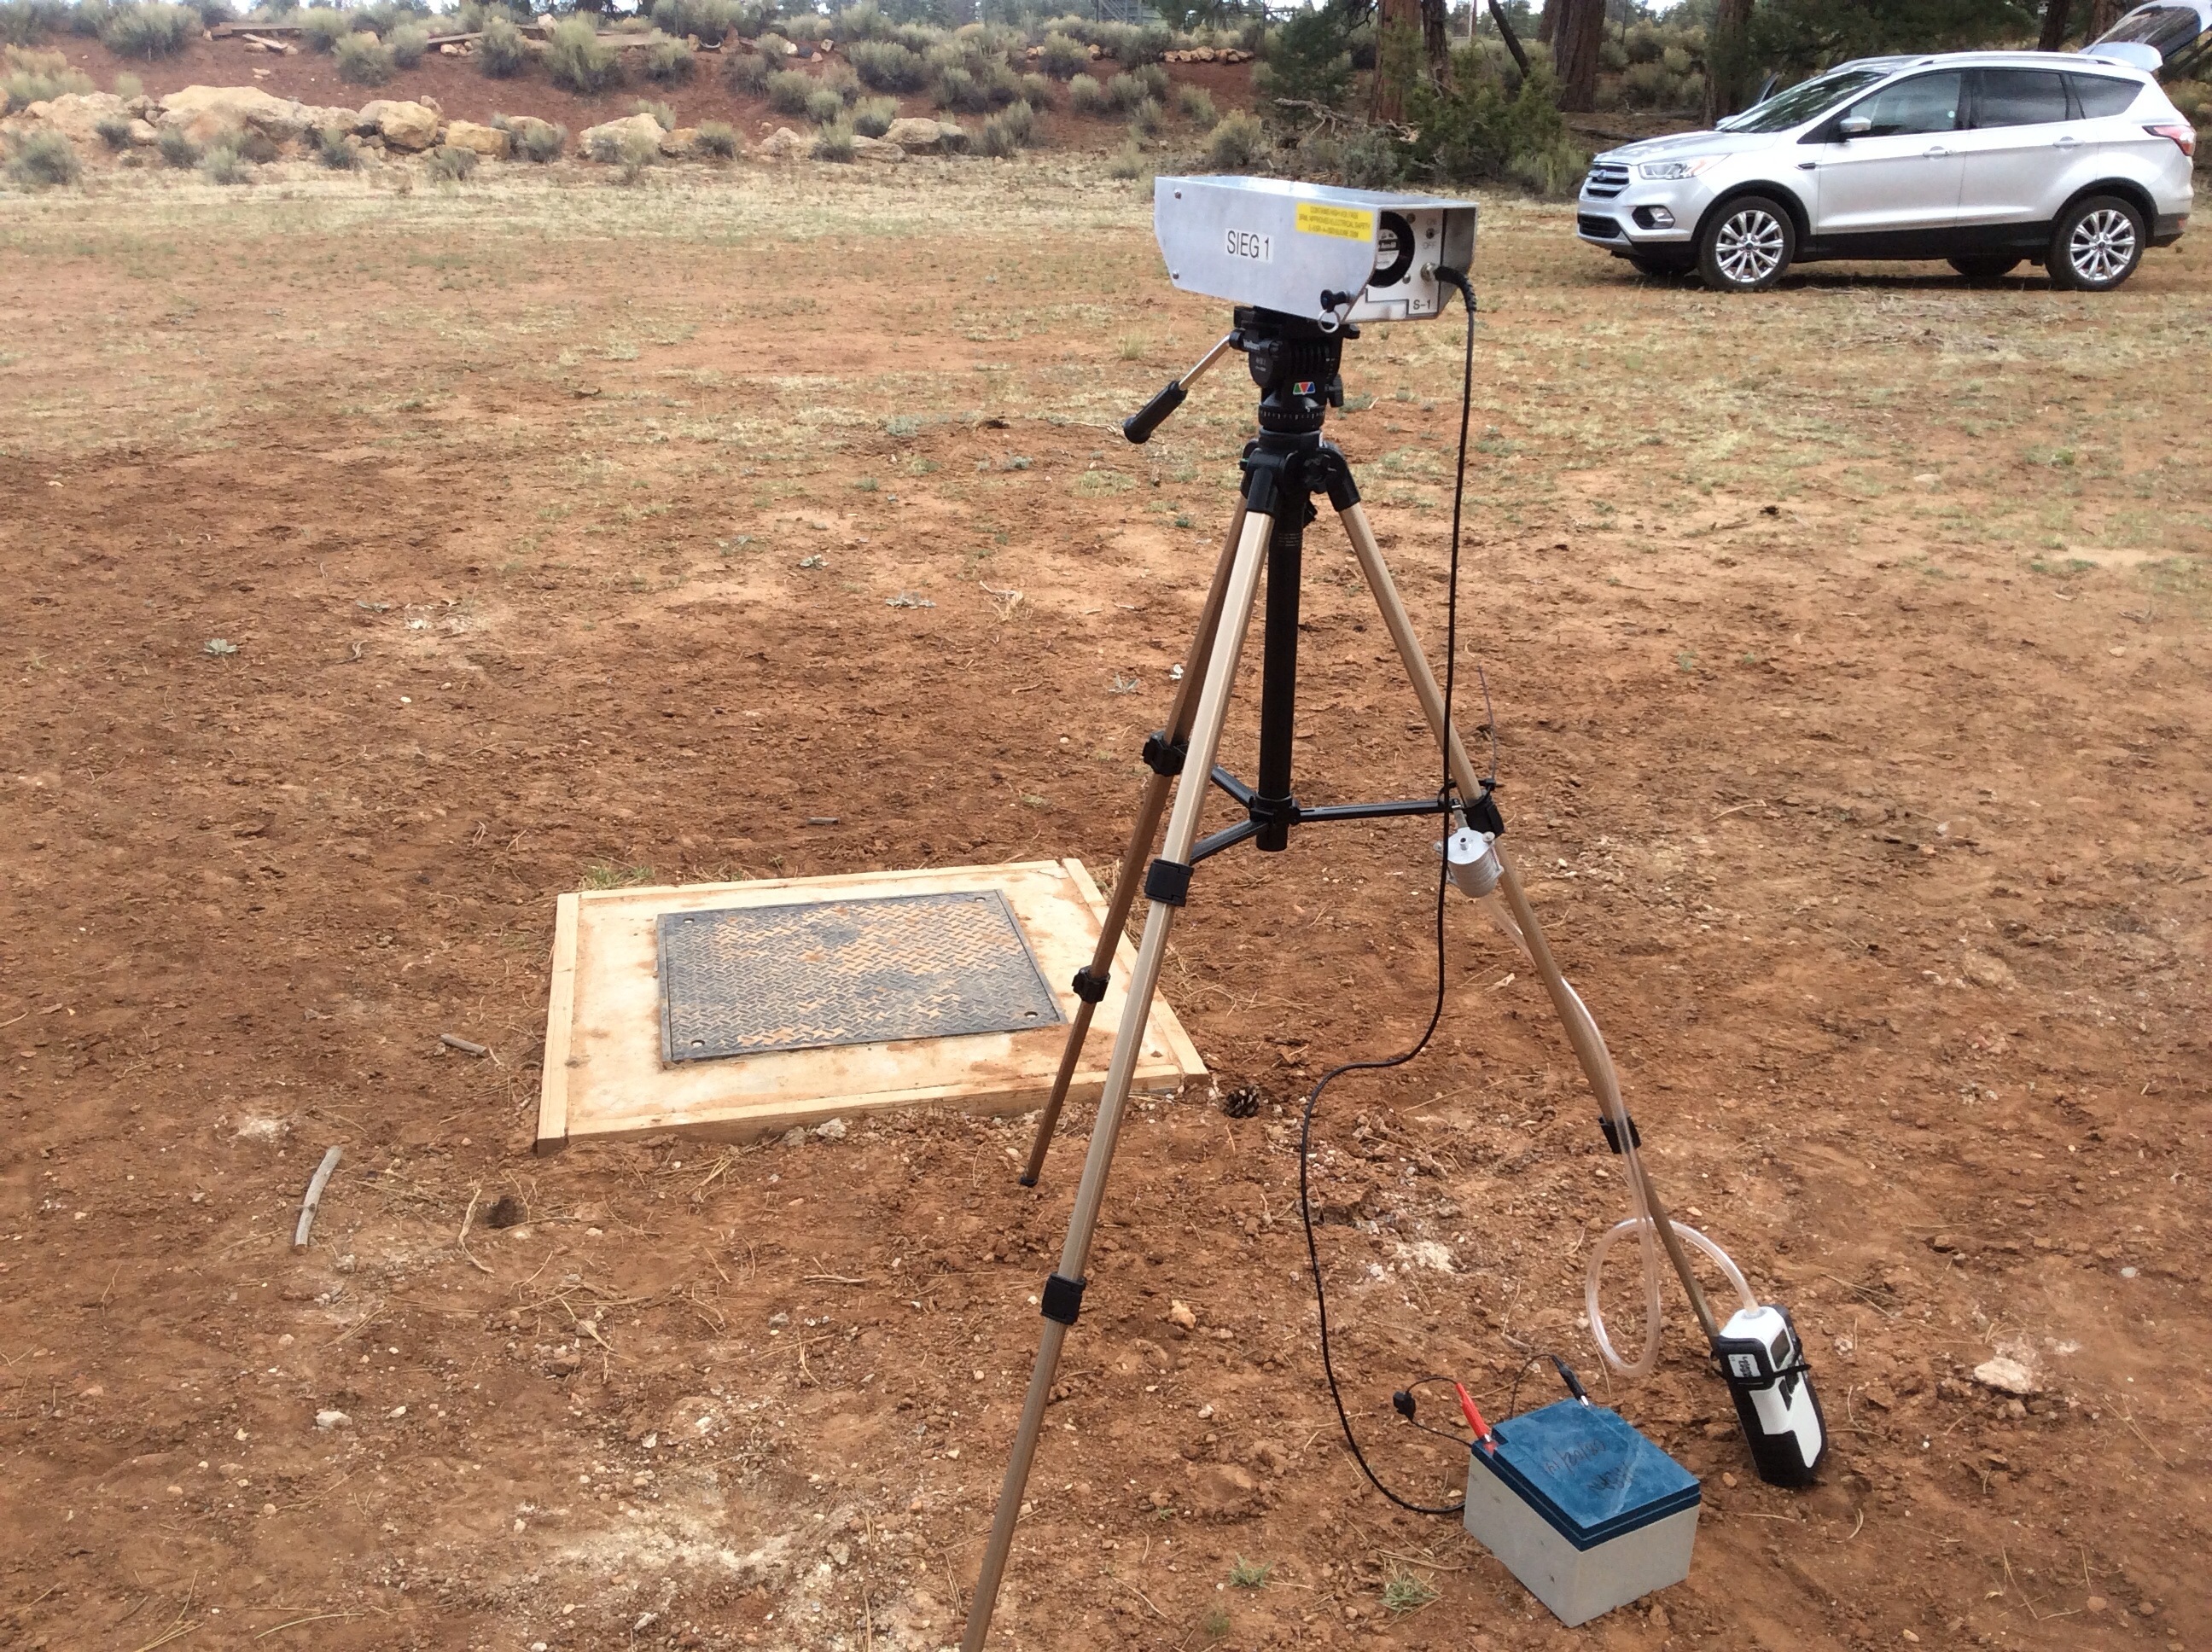  Tripod with active dust sampler on it pointed toward the mine site and attached to batteries.  Concrete and metal structure on the ground is groundwater well covering. 